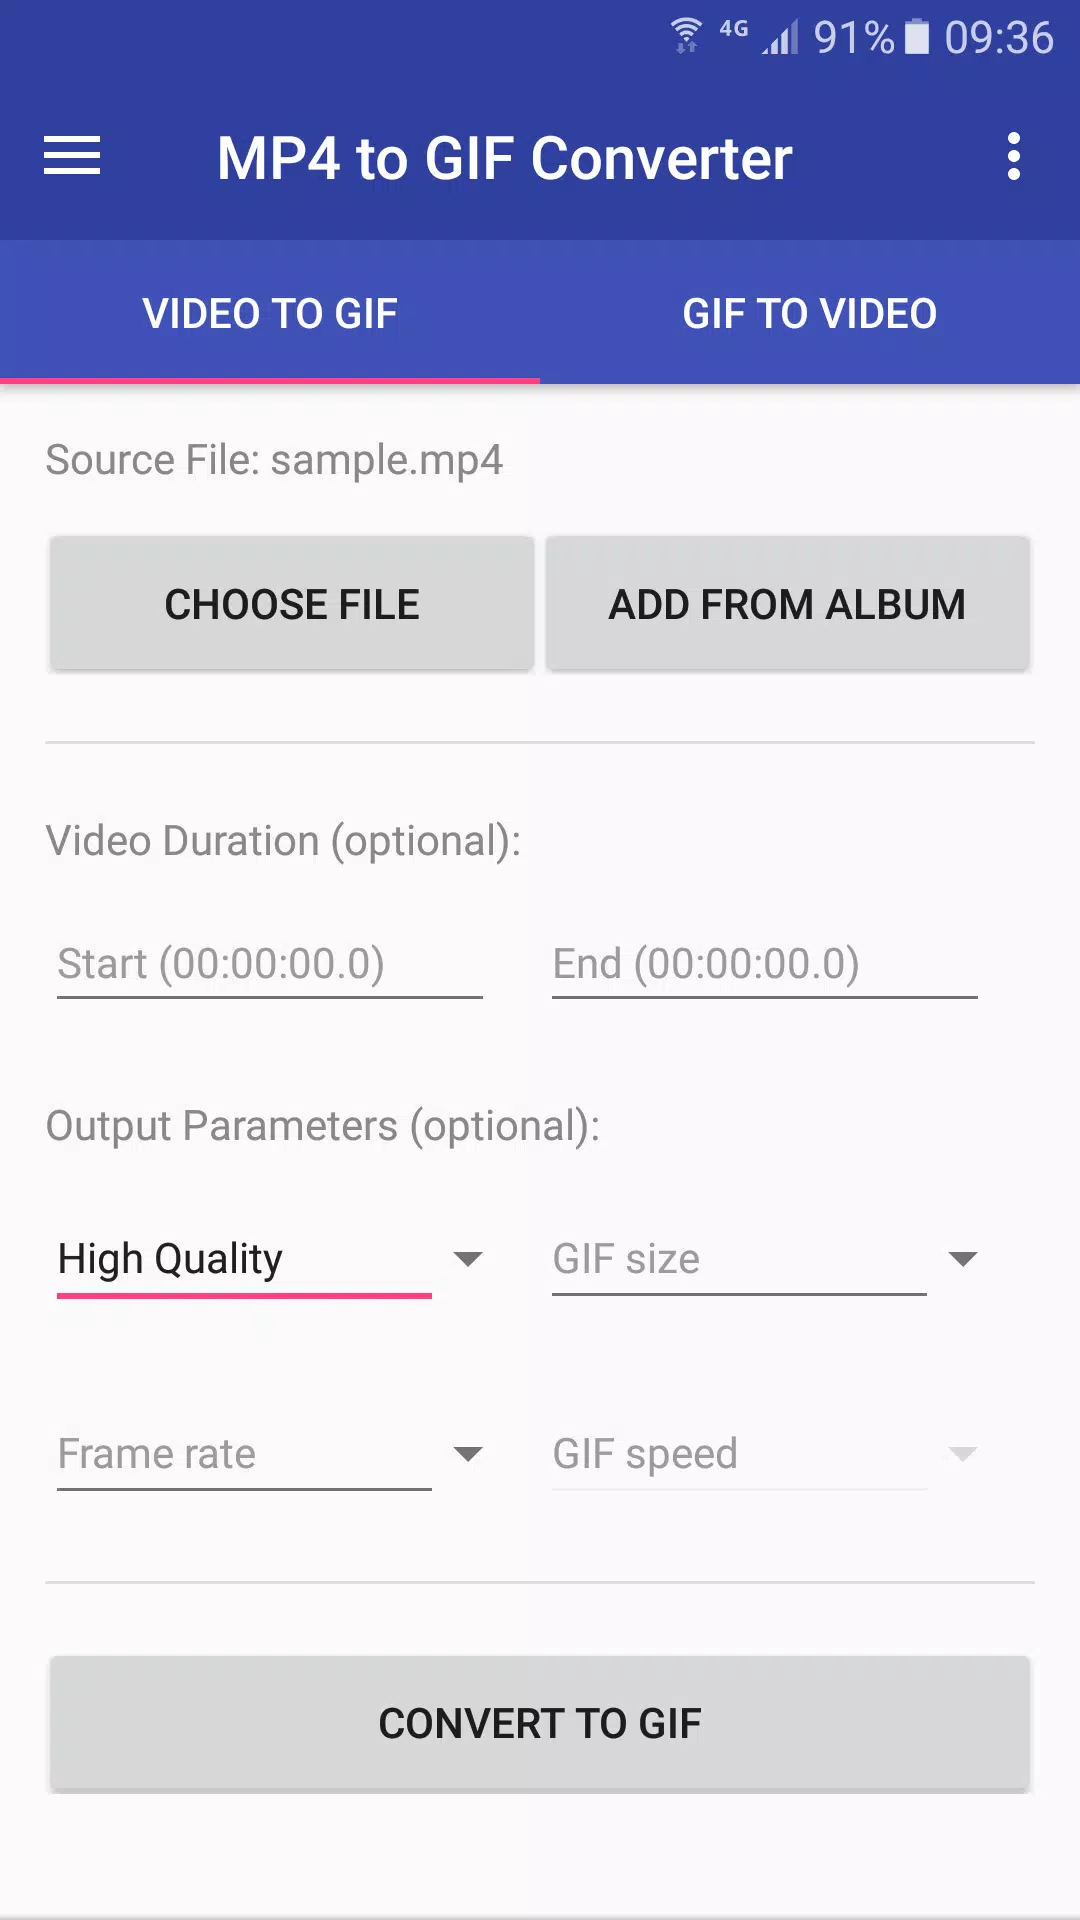 How to Convert a GIF to MP4 Video 